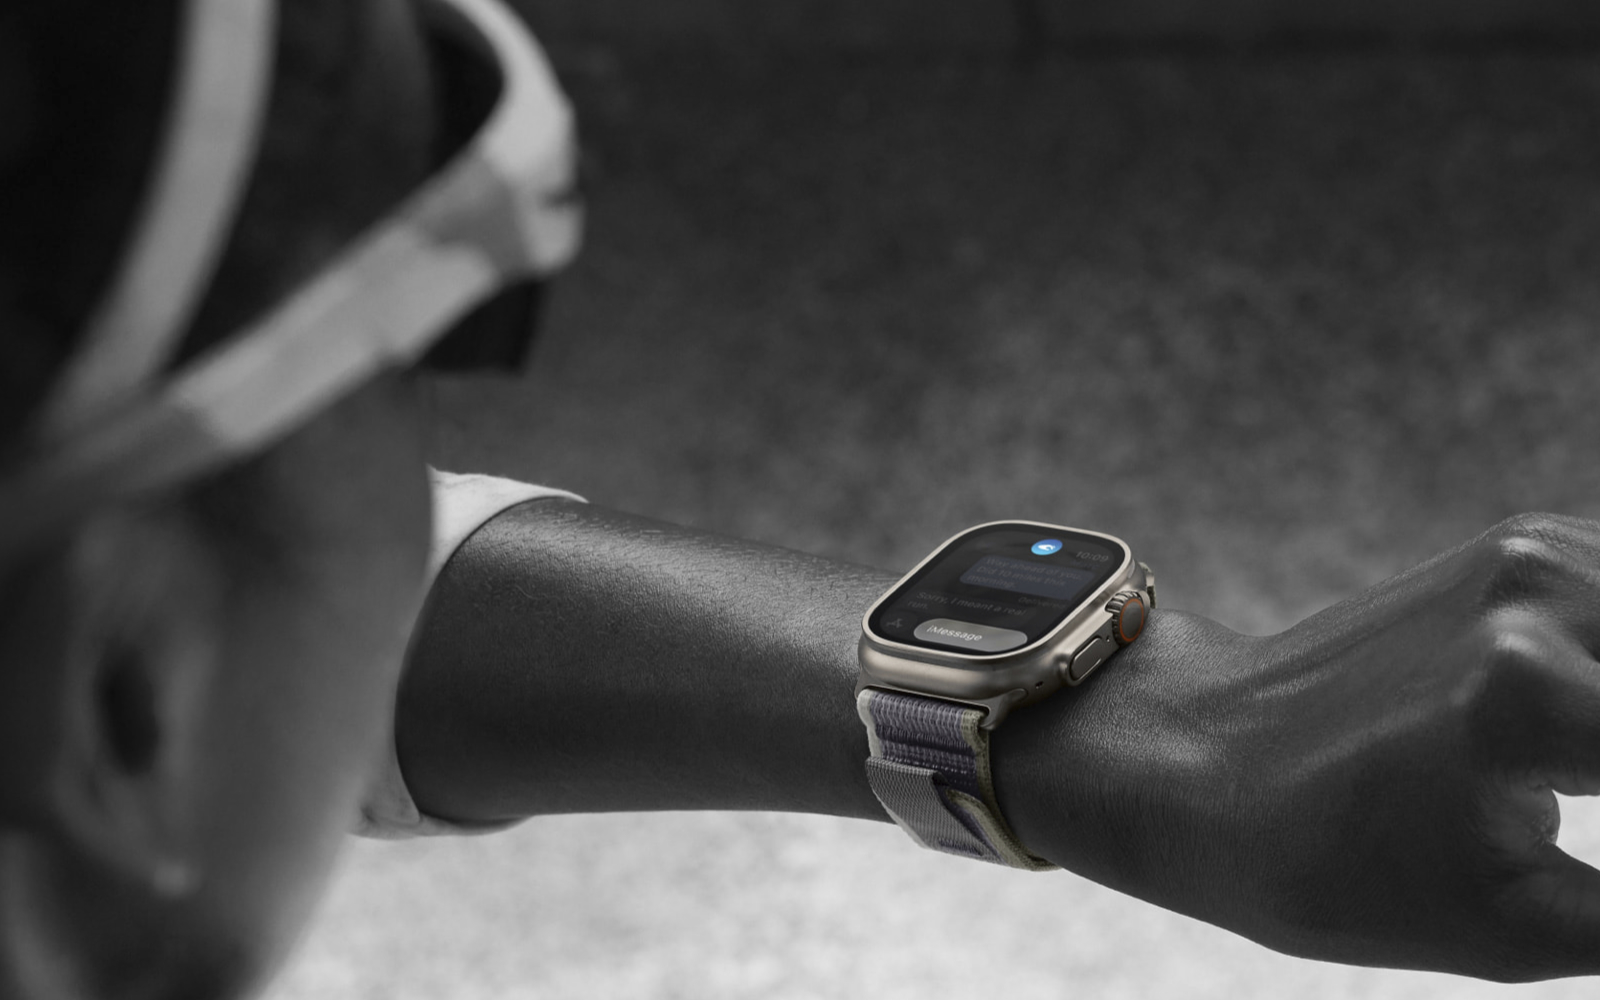 Apple Watch Ultra 2 lifestyle double tap gesture